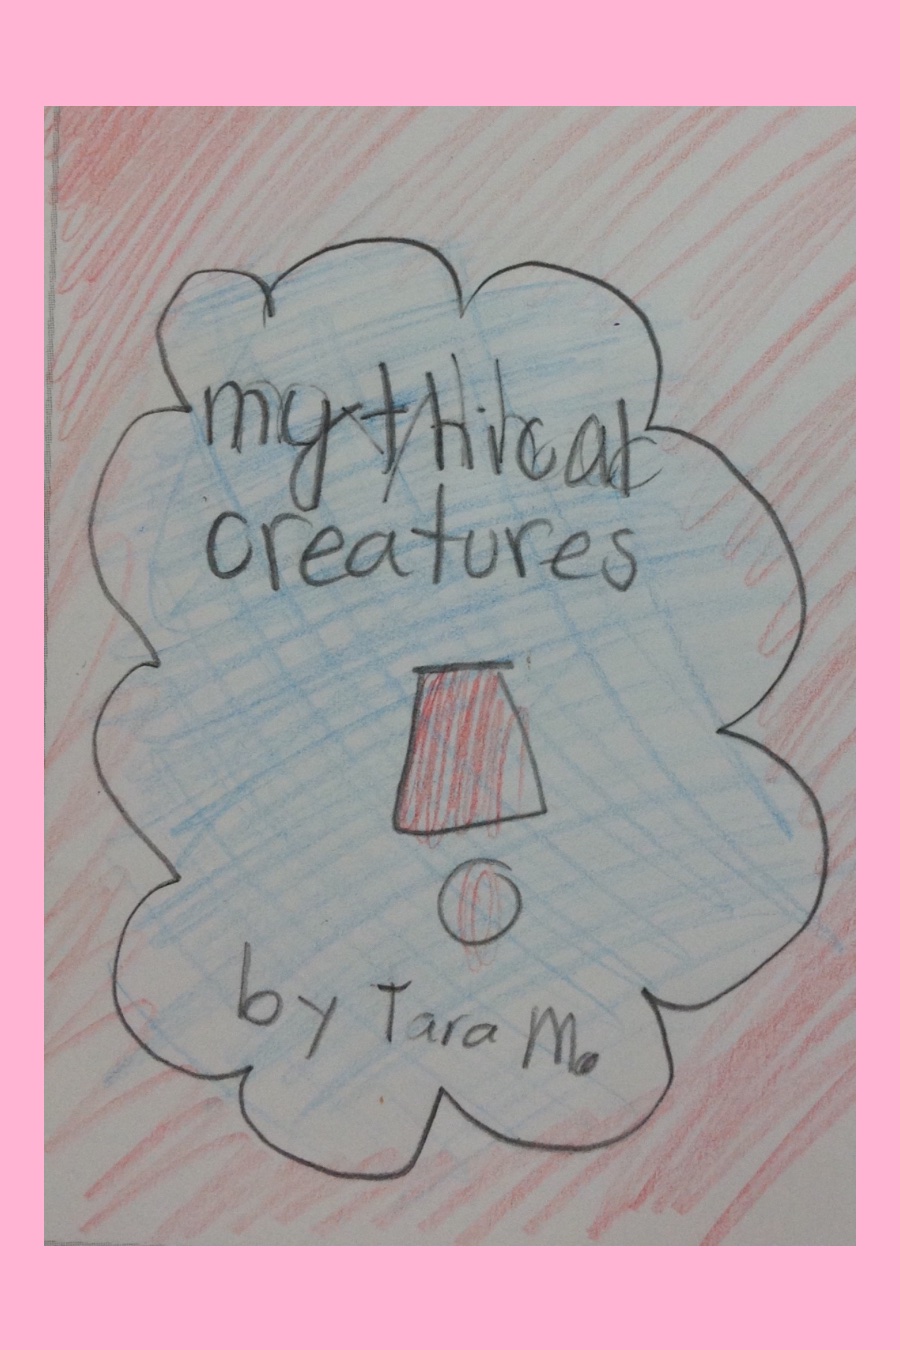 A Guide to Mythical Creatures by Tara M